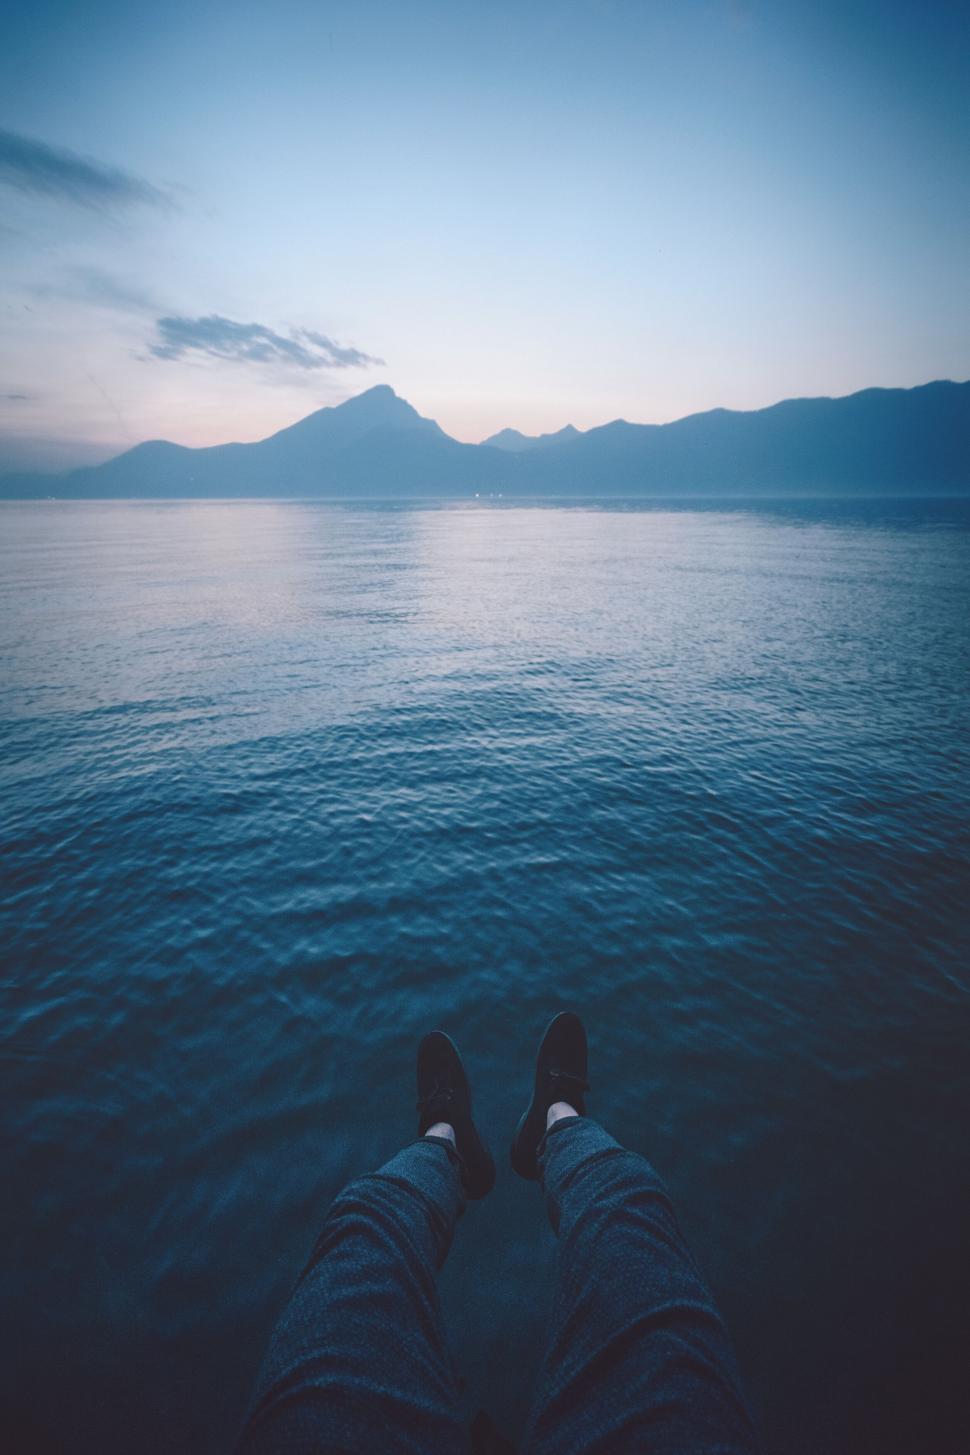 Free Image of A person s legs on a dock overlooking a body of water 